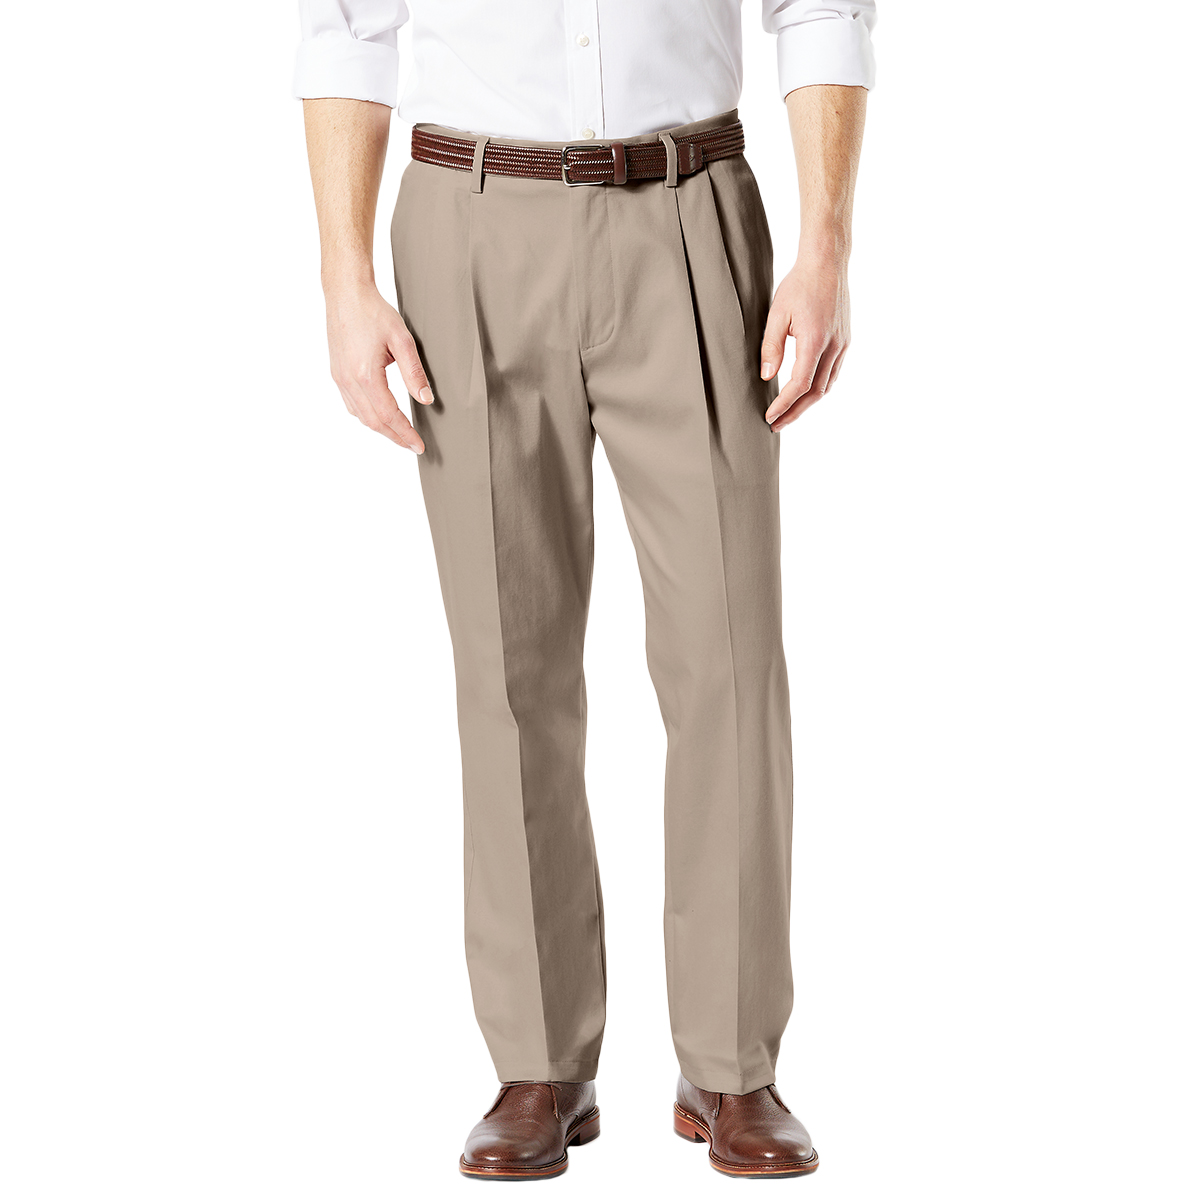 Dockers Men's Classic Fit Signature Khaki 2.0 Stretch Pleated Crease Pants - Brown, 36/29